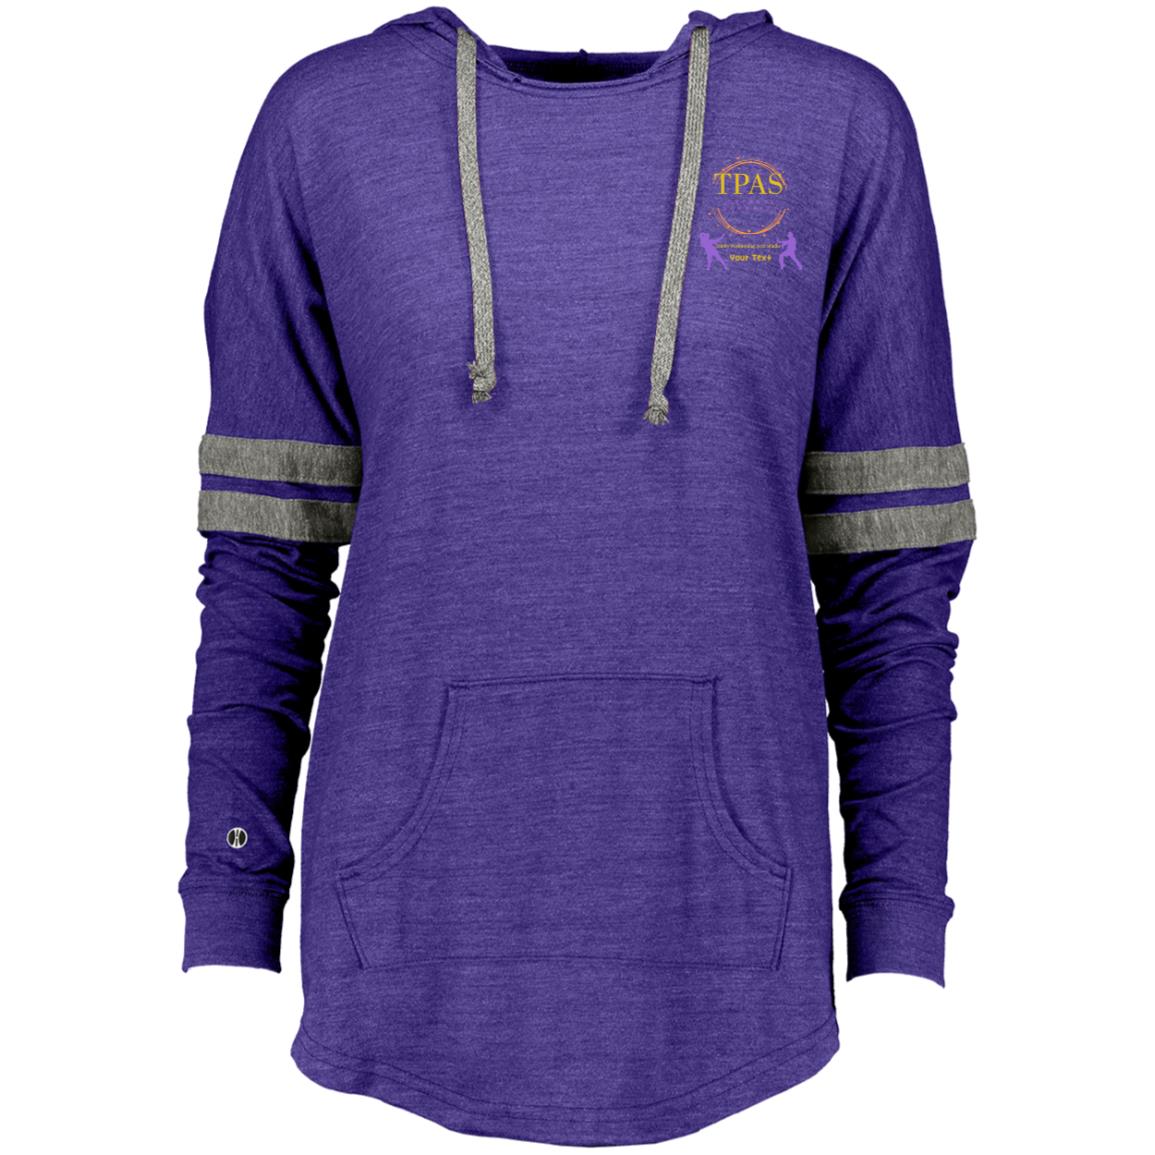 TPAS Competition Team Ladies Hooded Low Key Pullover